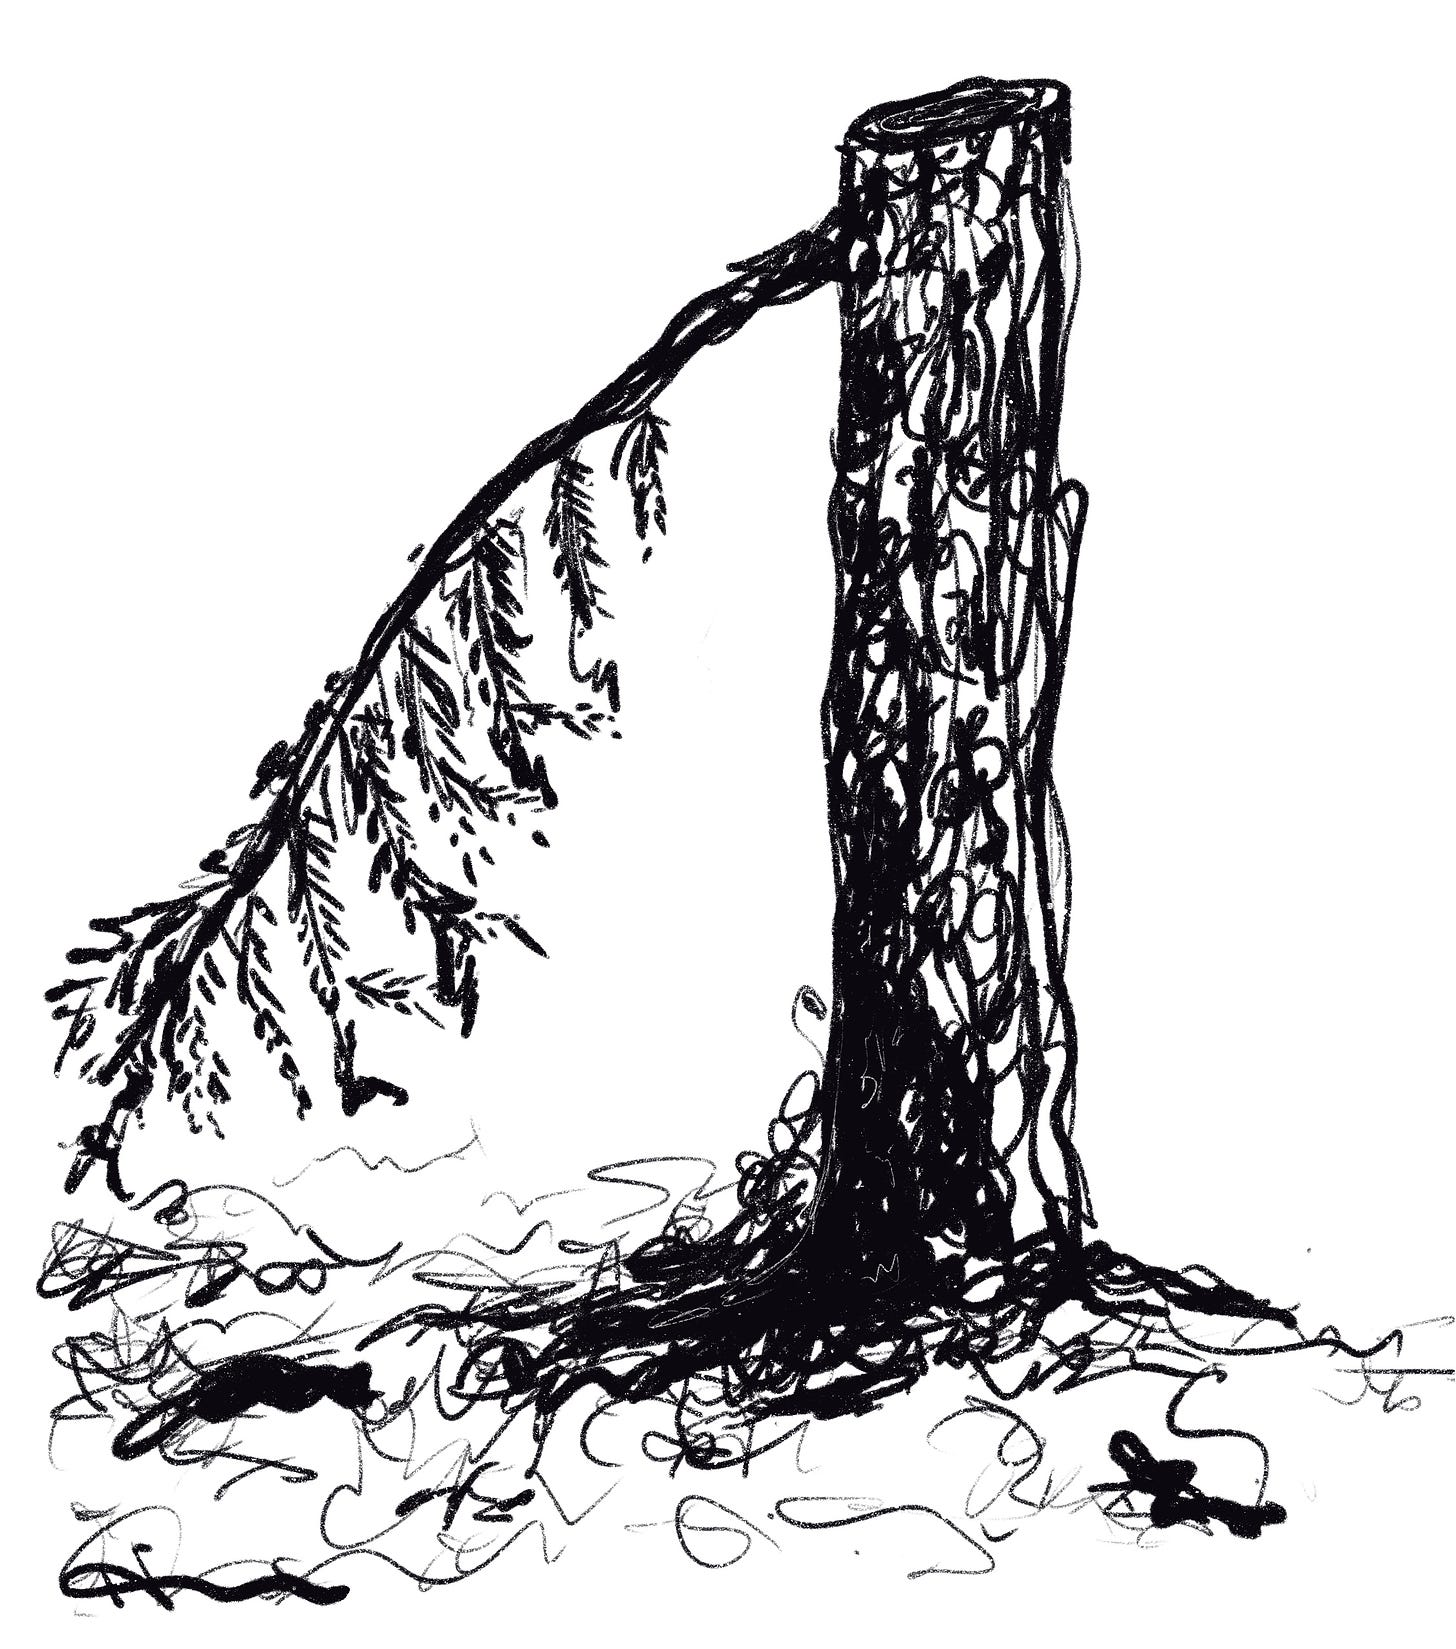 A roughly sketched digital drawing of a tall stump of a pine tree with one lonely branch hanging towards the ground. 